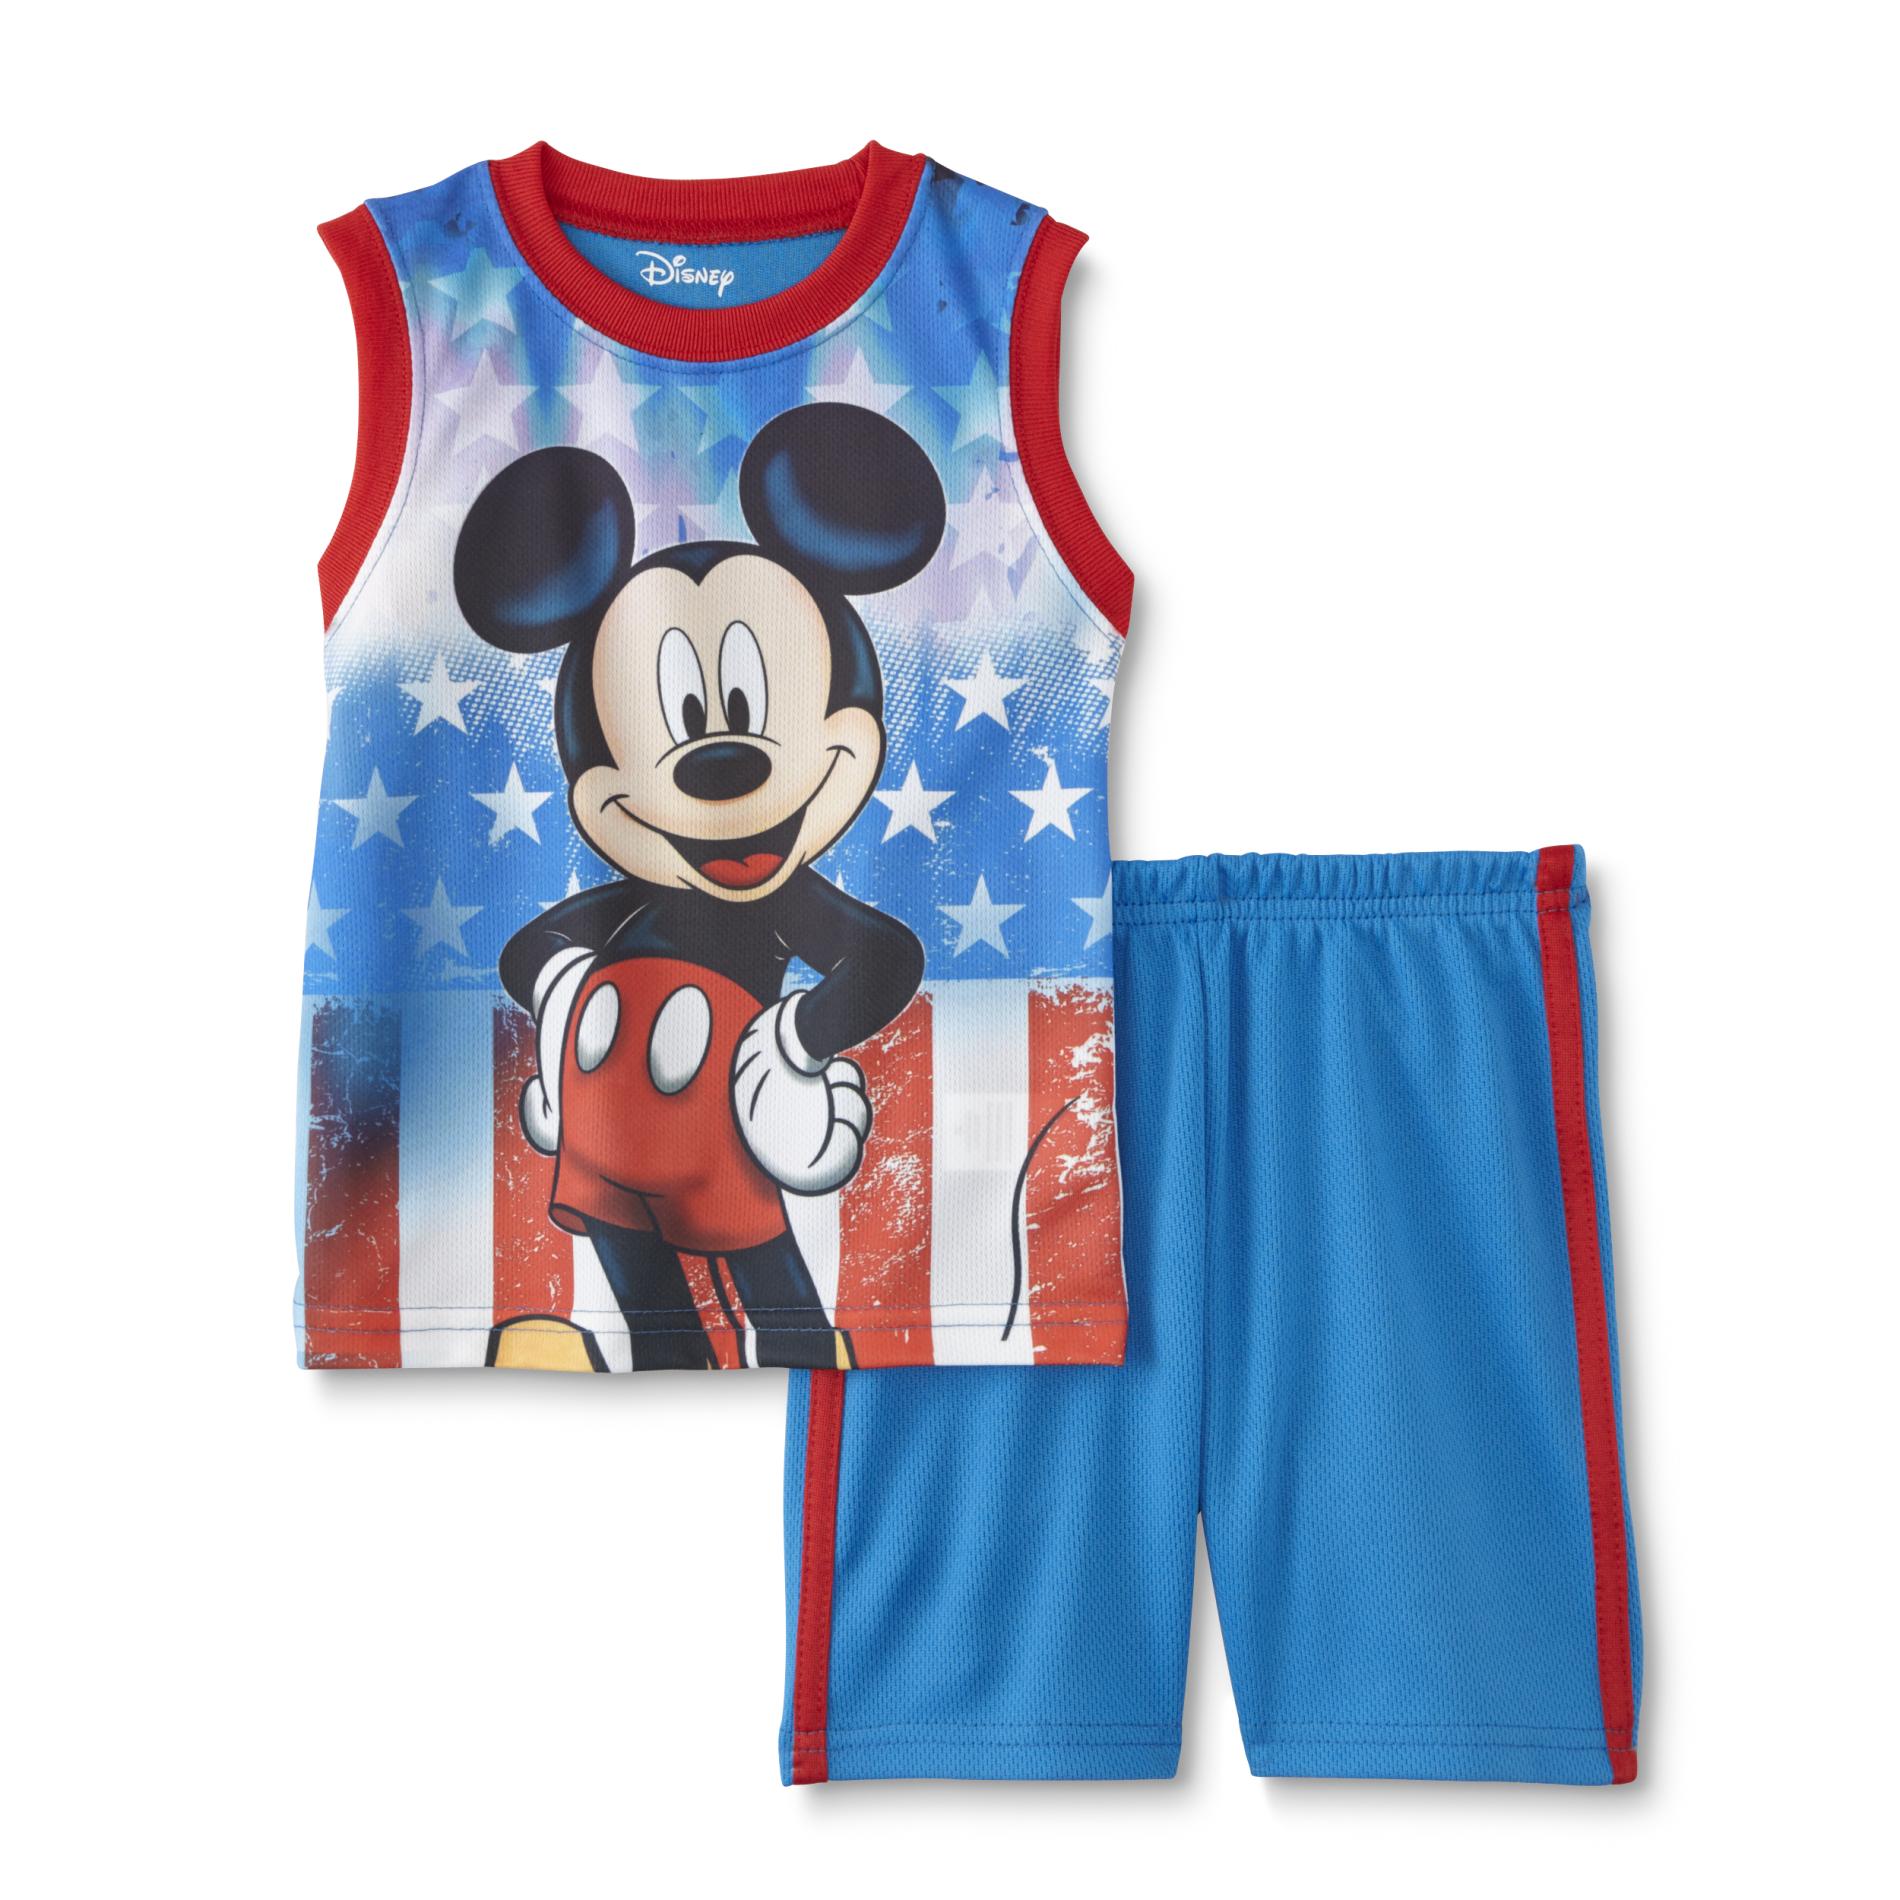 Mickey Mouse Infant & Toddler Boy's Athletic Tank Top & Shorts